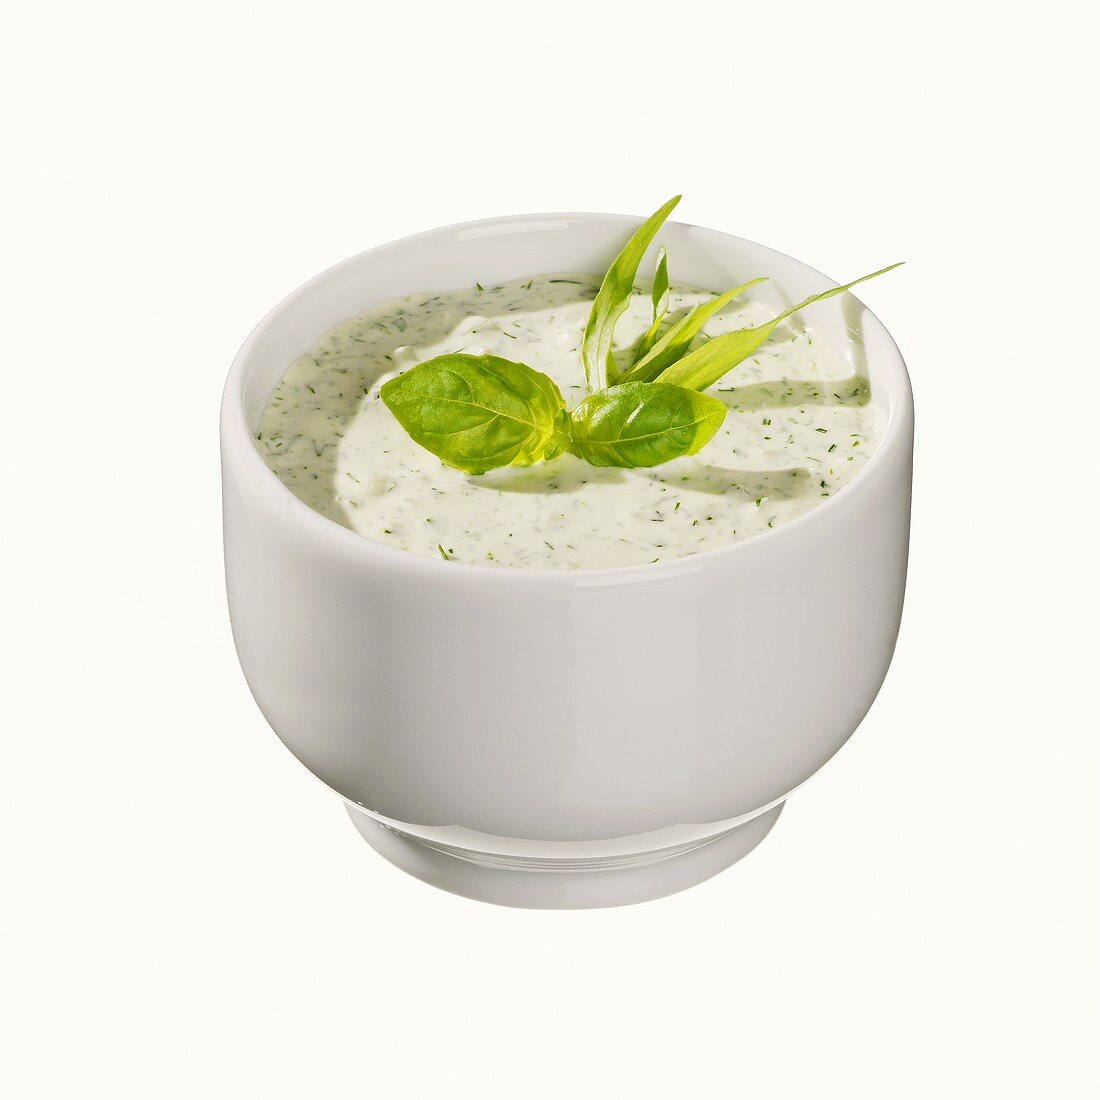 Herb mayonnaise in a small bowl